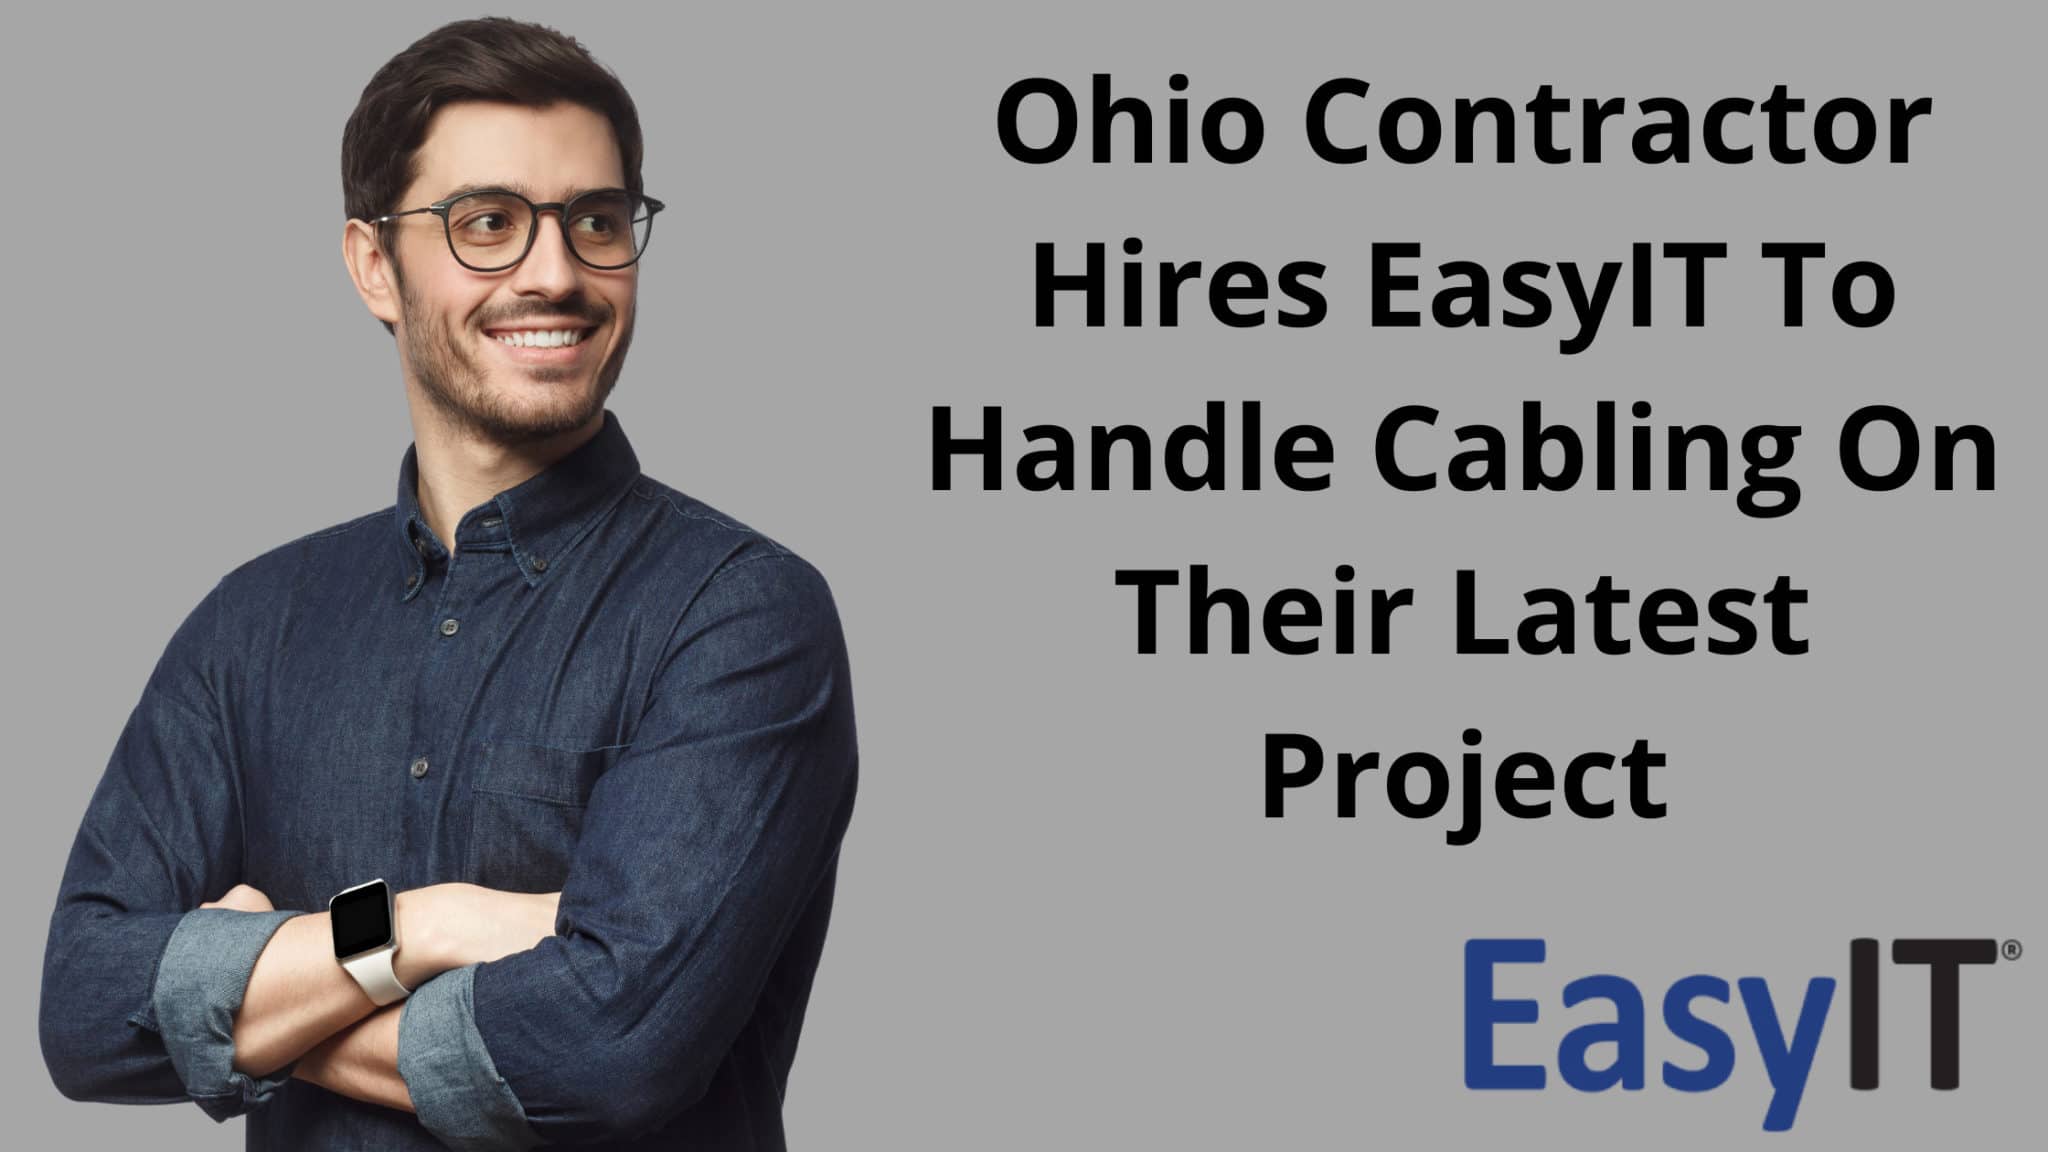 Ohio Contractor Hires EasyIT To Handle Cabling On Their Latest Project